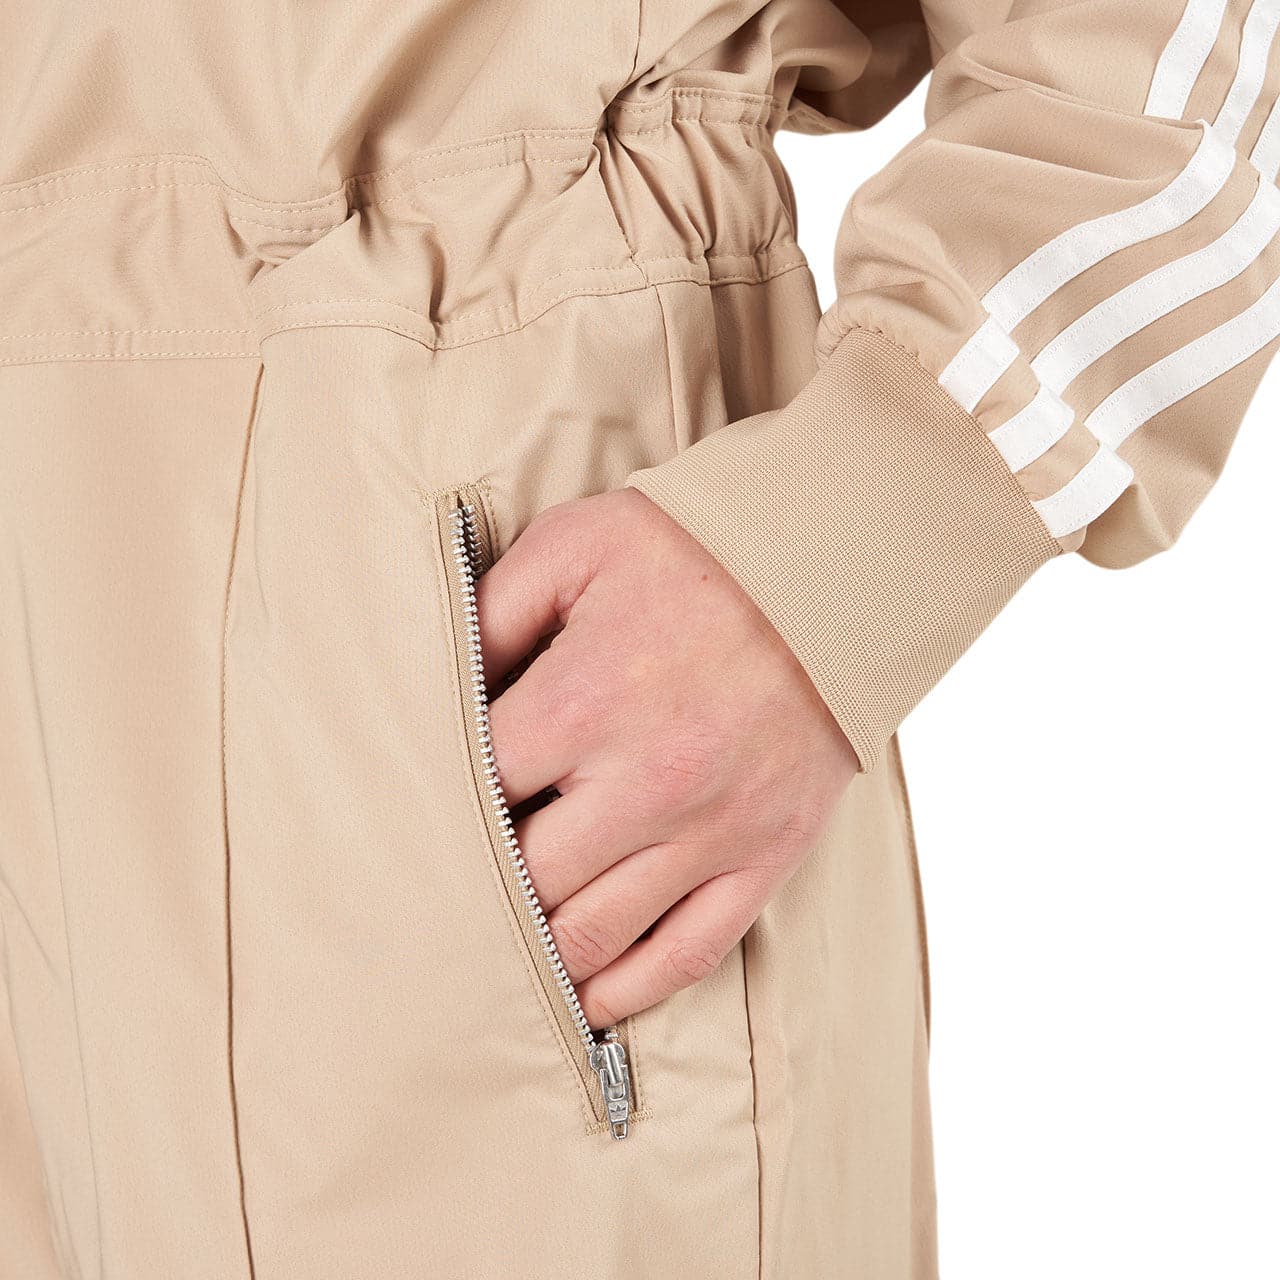 Adidas x Parley BOILERSUIT (Sand)  - Allike Store